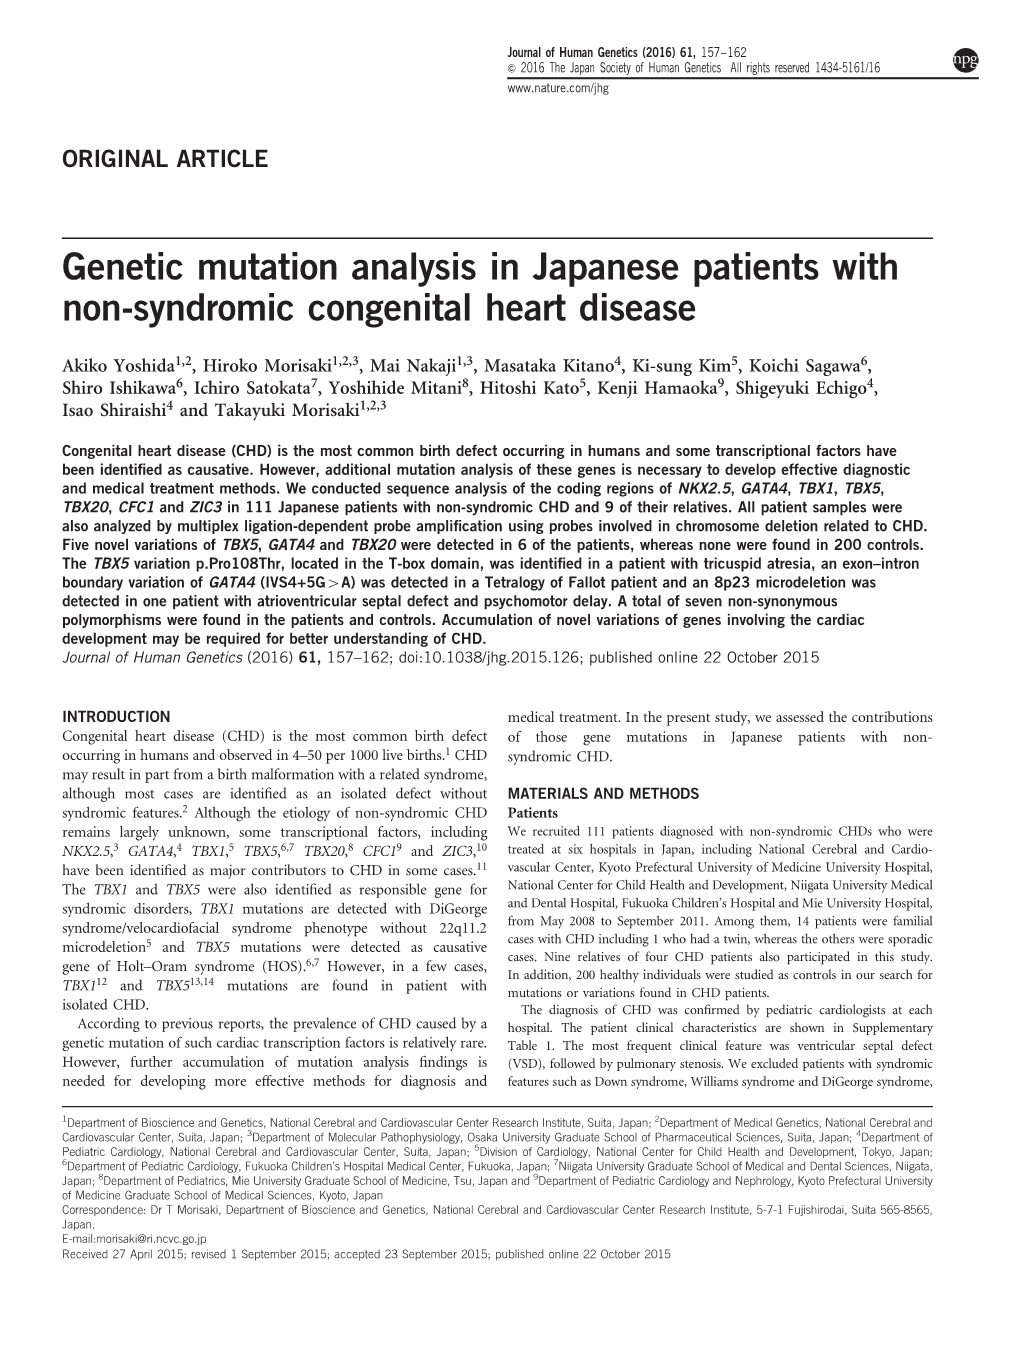 Genetic Mutation Analysis in Japanese Patients with Non-Syndromic Congenital Heart Disease